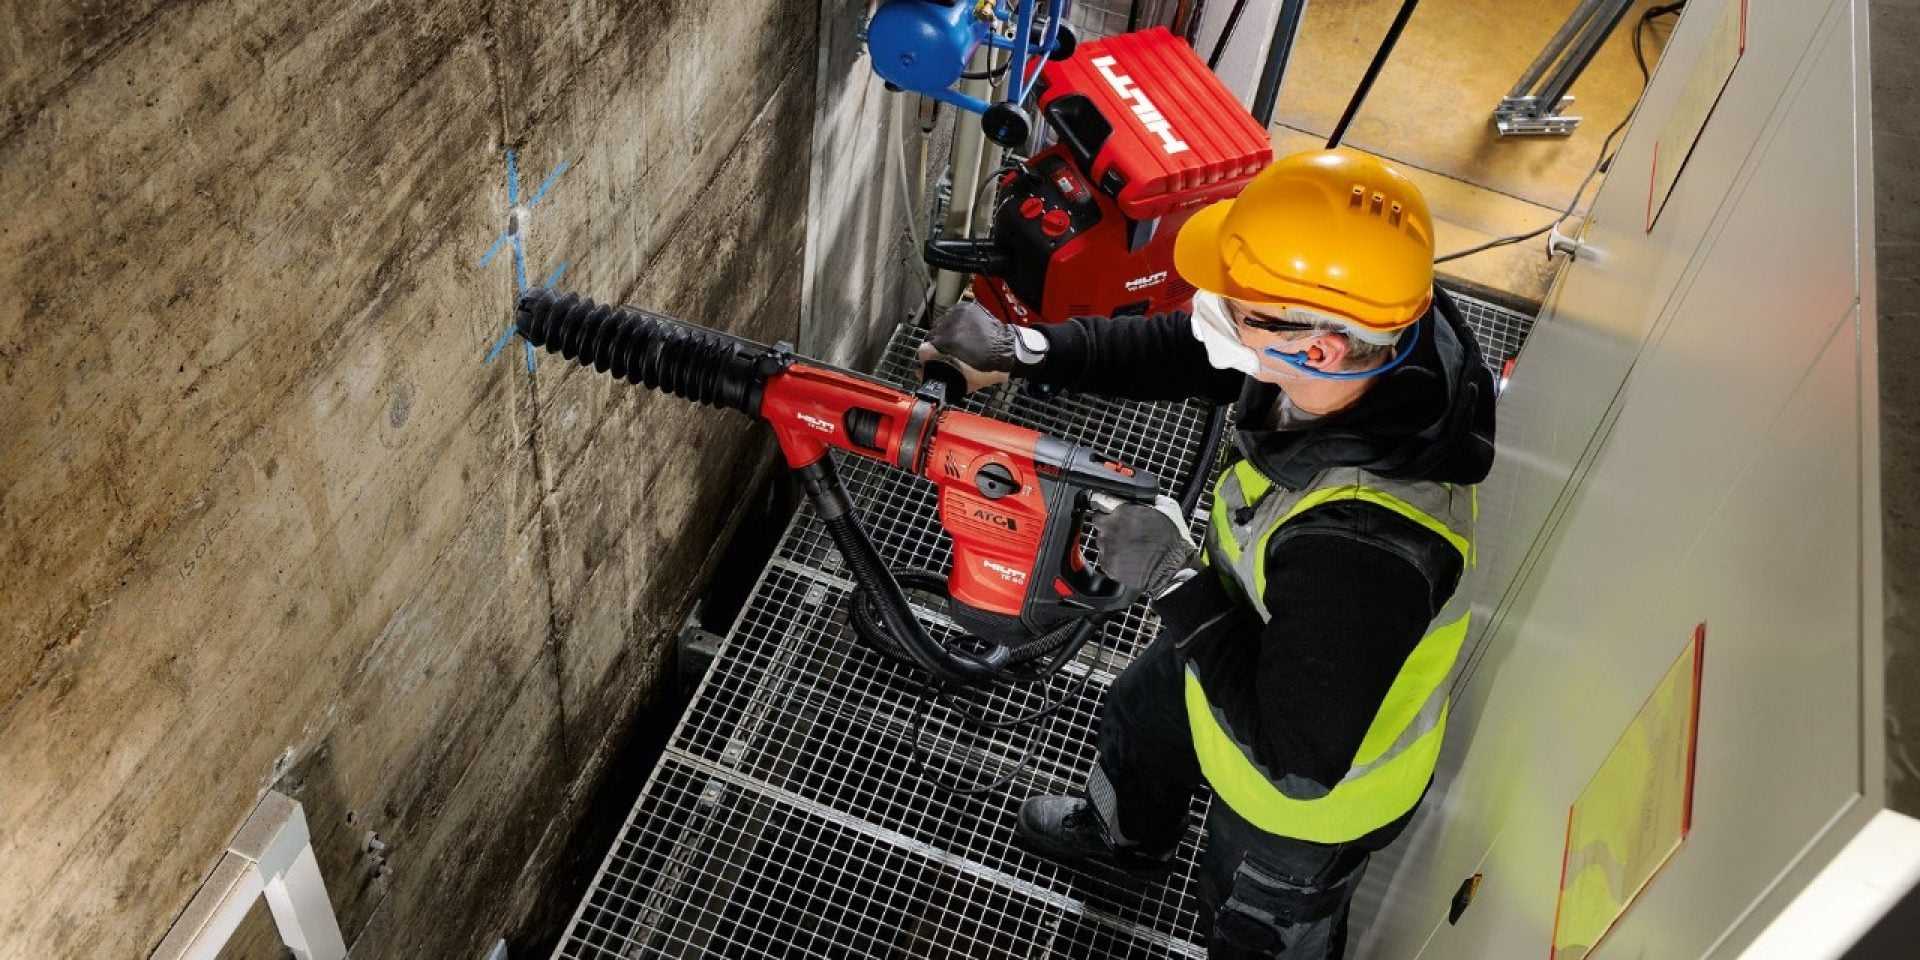 Health and safety at Hilti